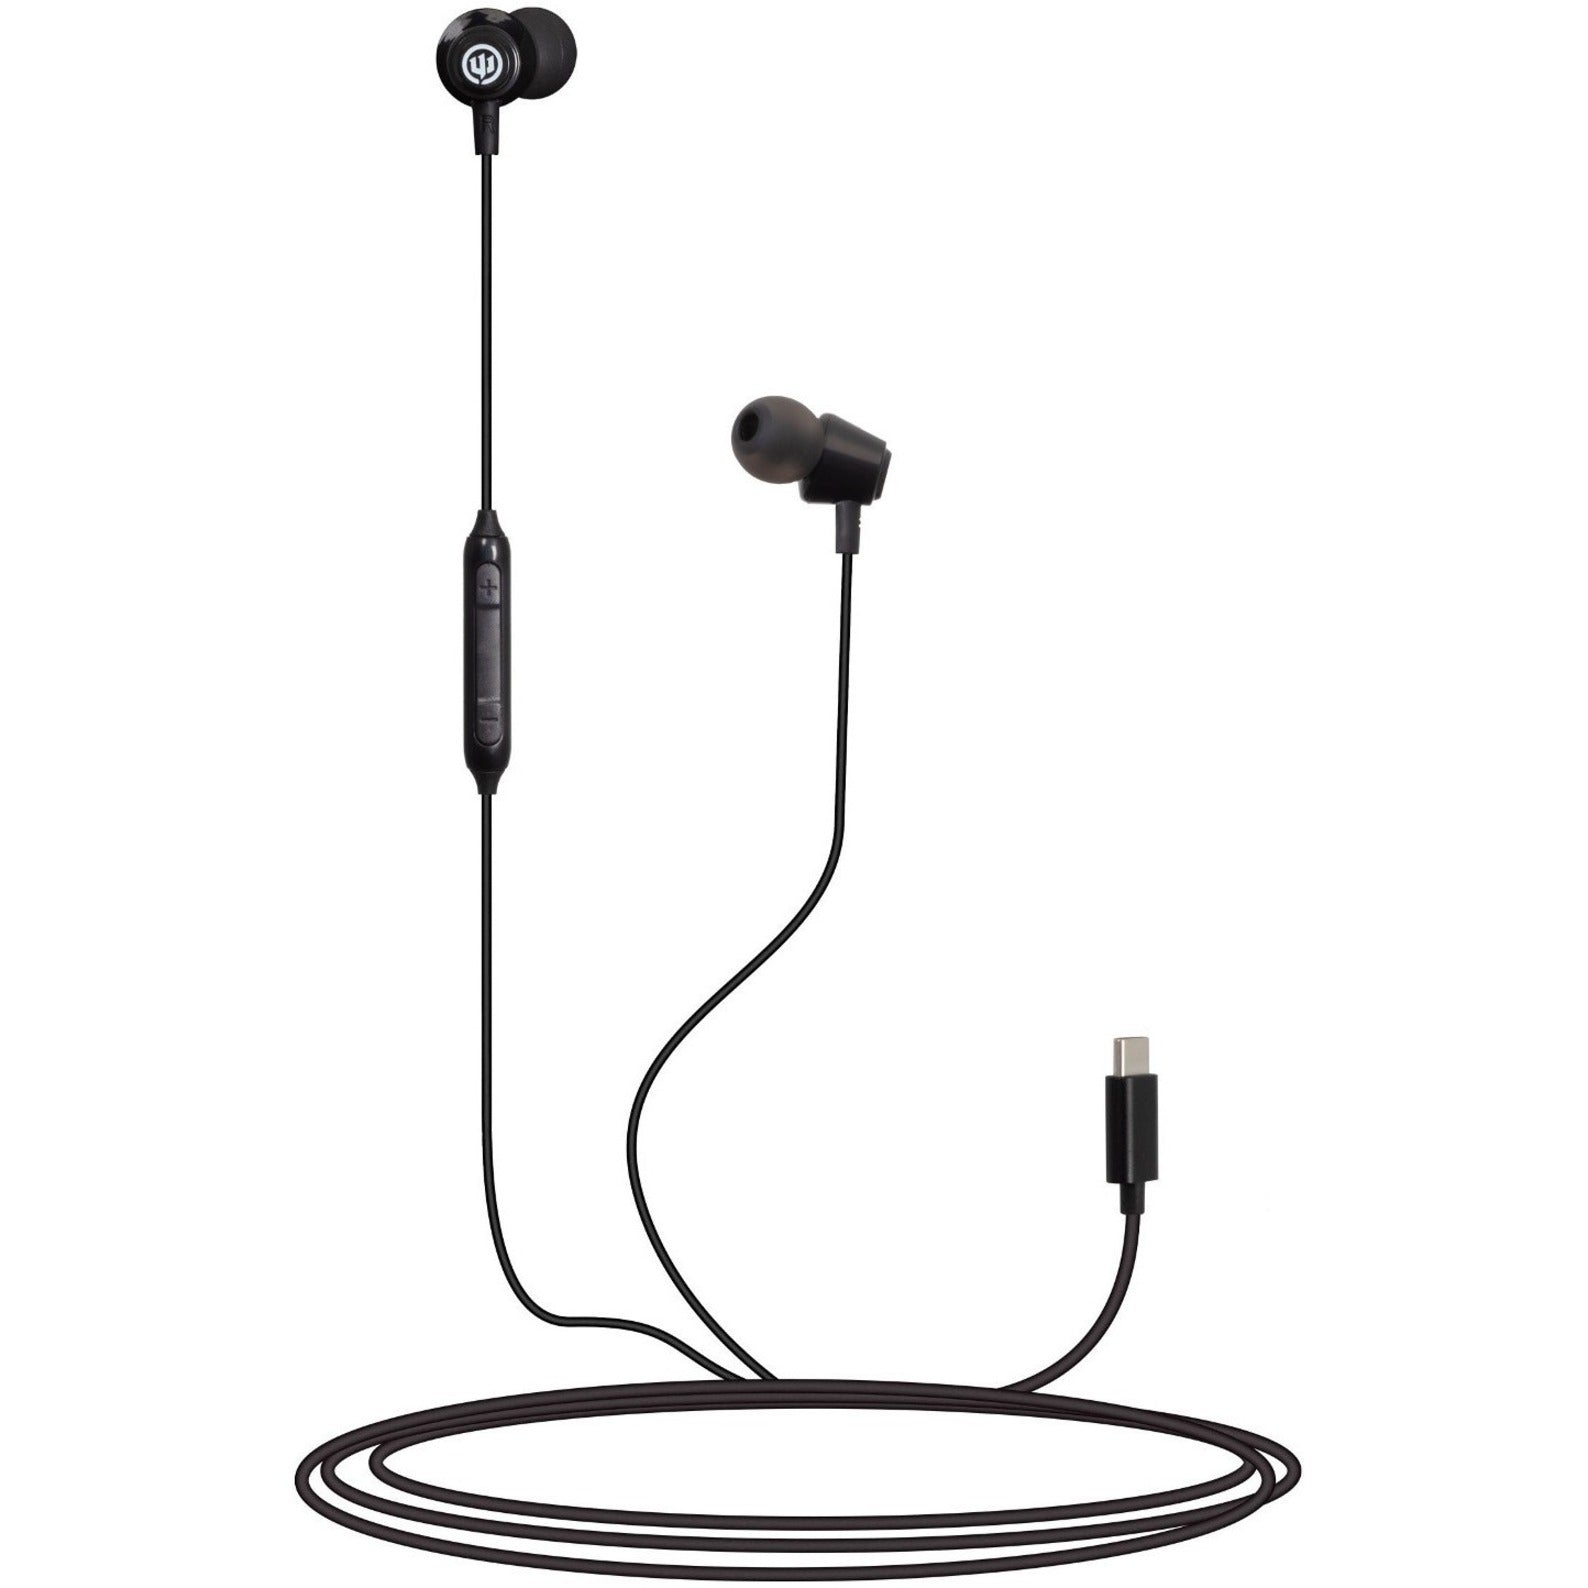 Wicked WI-4150 Ravian Earset, Bass Boost, Comfortable, USB Type C